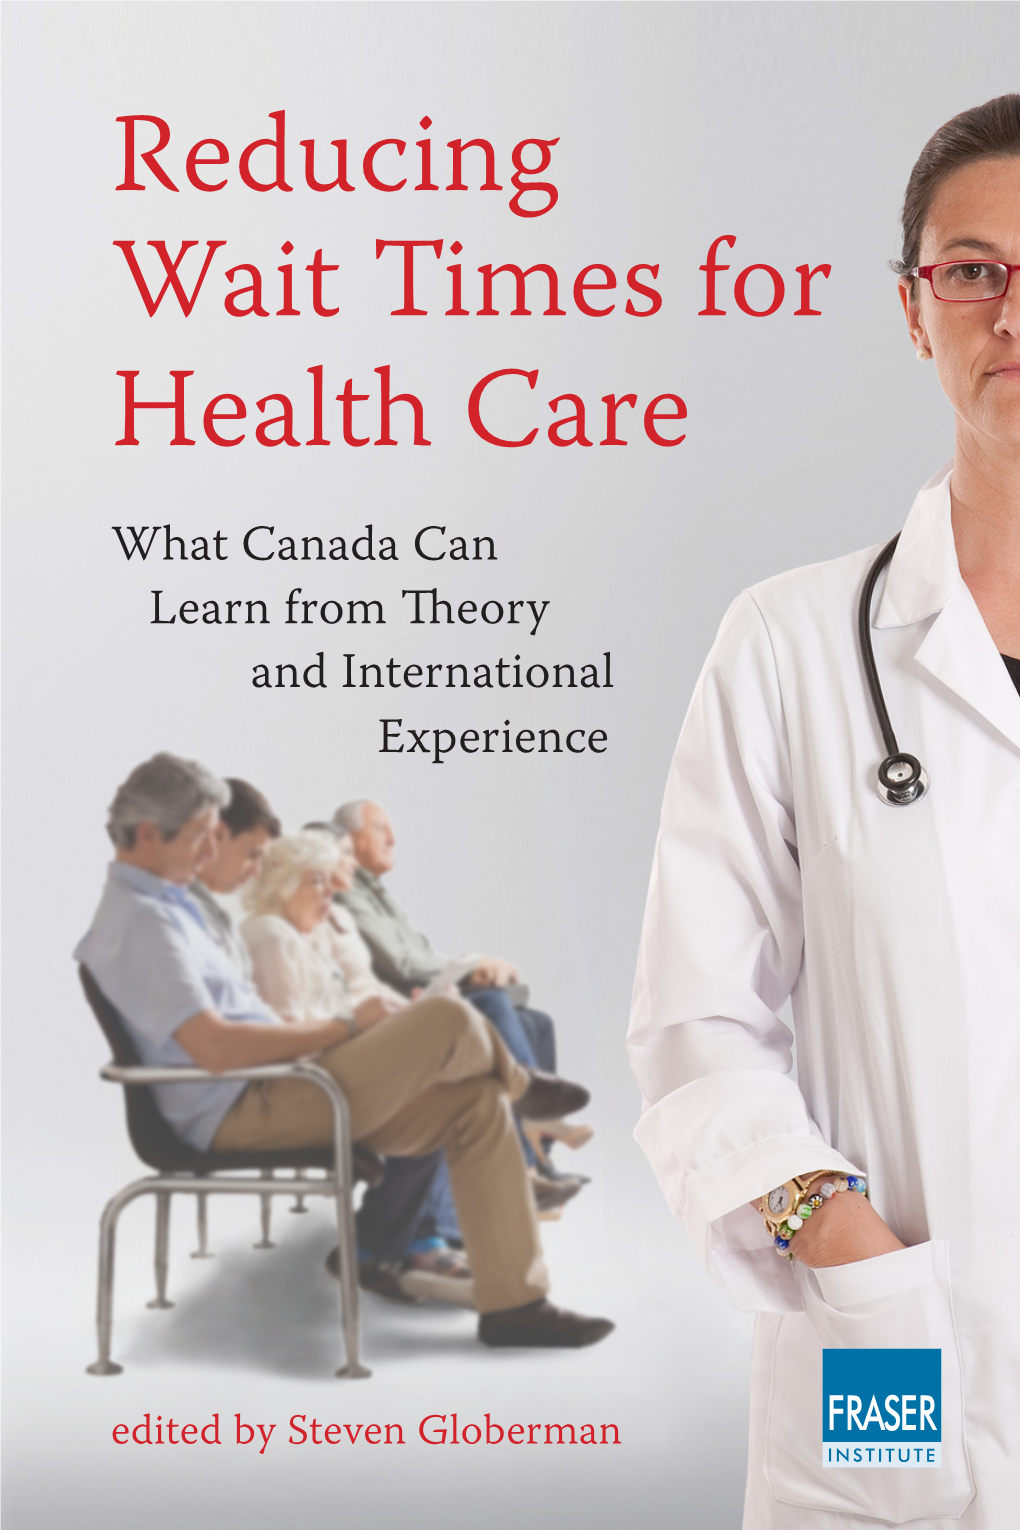 Reducing Wait Times for Health Care: What Canada Can Learn from Theory and International Experience / Steven Globerman (Editor)